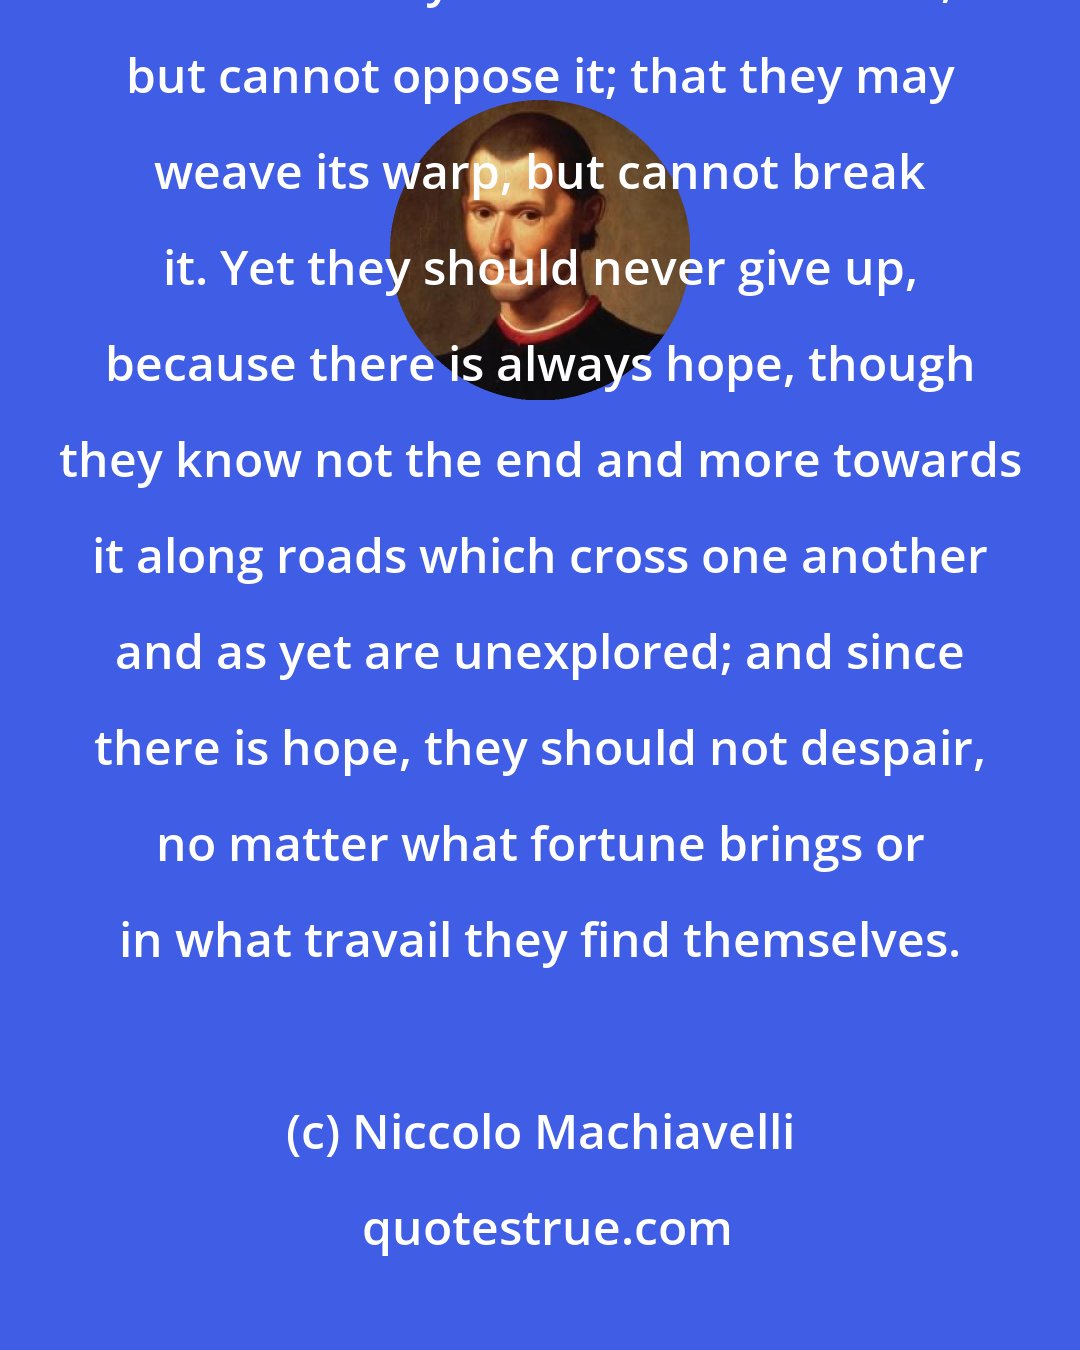 Niccolo Machiavelli: I assert once again as a truth to which history as a whole bears witness that men may second their fortune, but cannot oppose it; that they may weave its warp, but cannot break it. Yet they should never give up, because there is always hope, though they know not the end and more towards it along roads which cross one another and as yet are unexplored; and since there is hope, they should not despair, no matter what fortune brings or in what travail they find themselves.